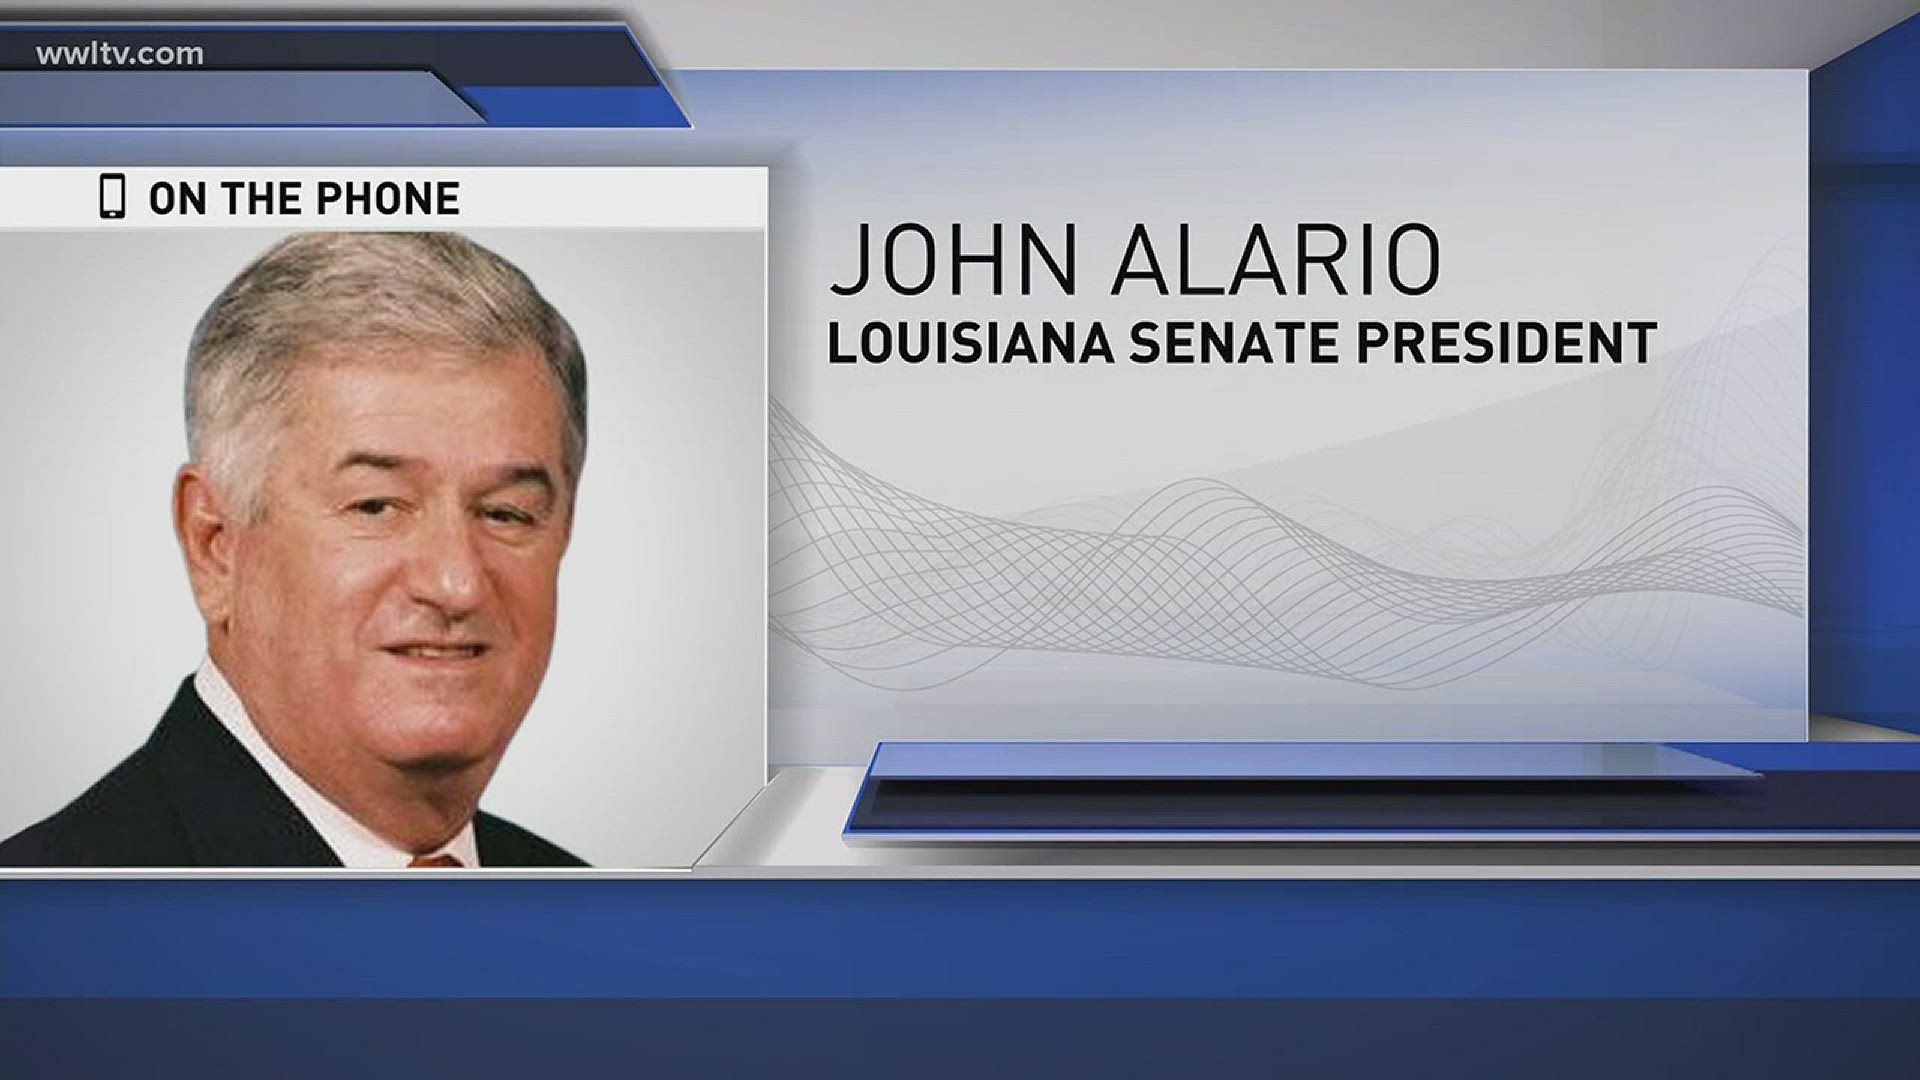 With Louisiana facing a billion-dollar budget deficit, Senate president John Alario explains what state lawmakers hope to accomplish during the special session.